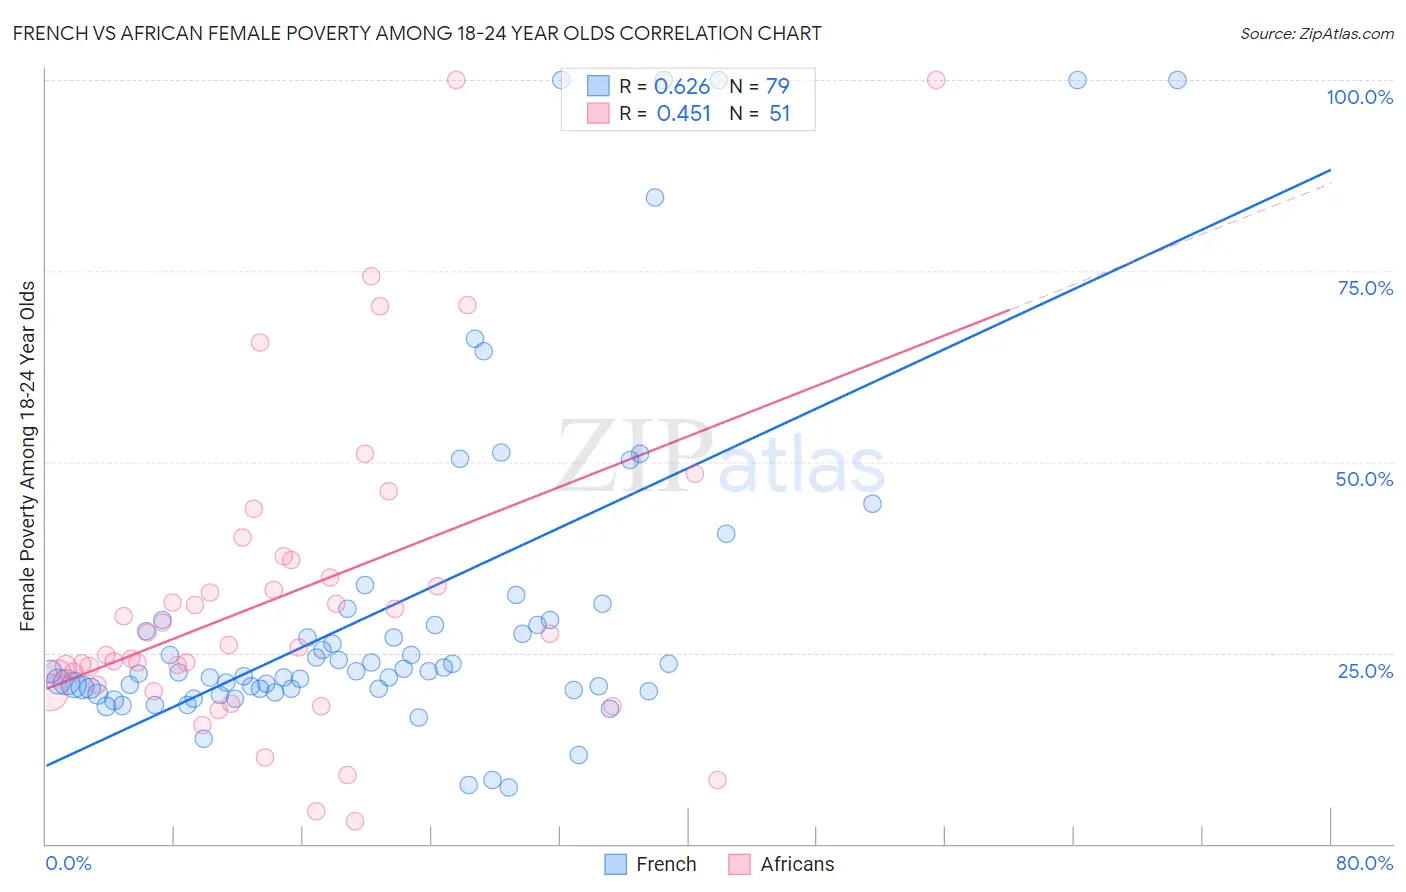 French vs African Female Poverty Among 18-24 Year Olds